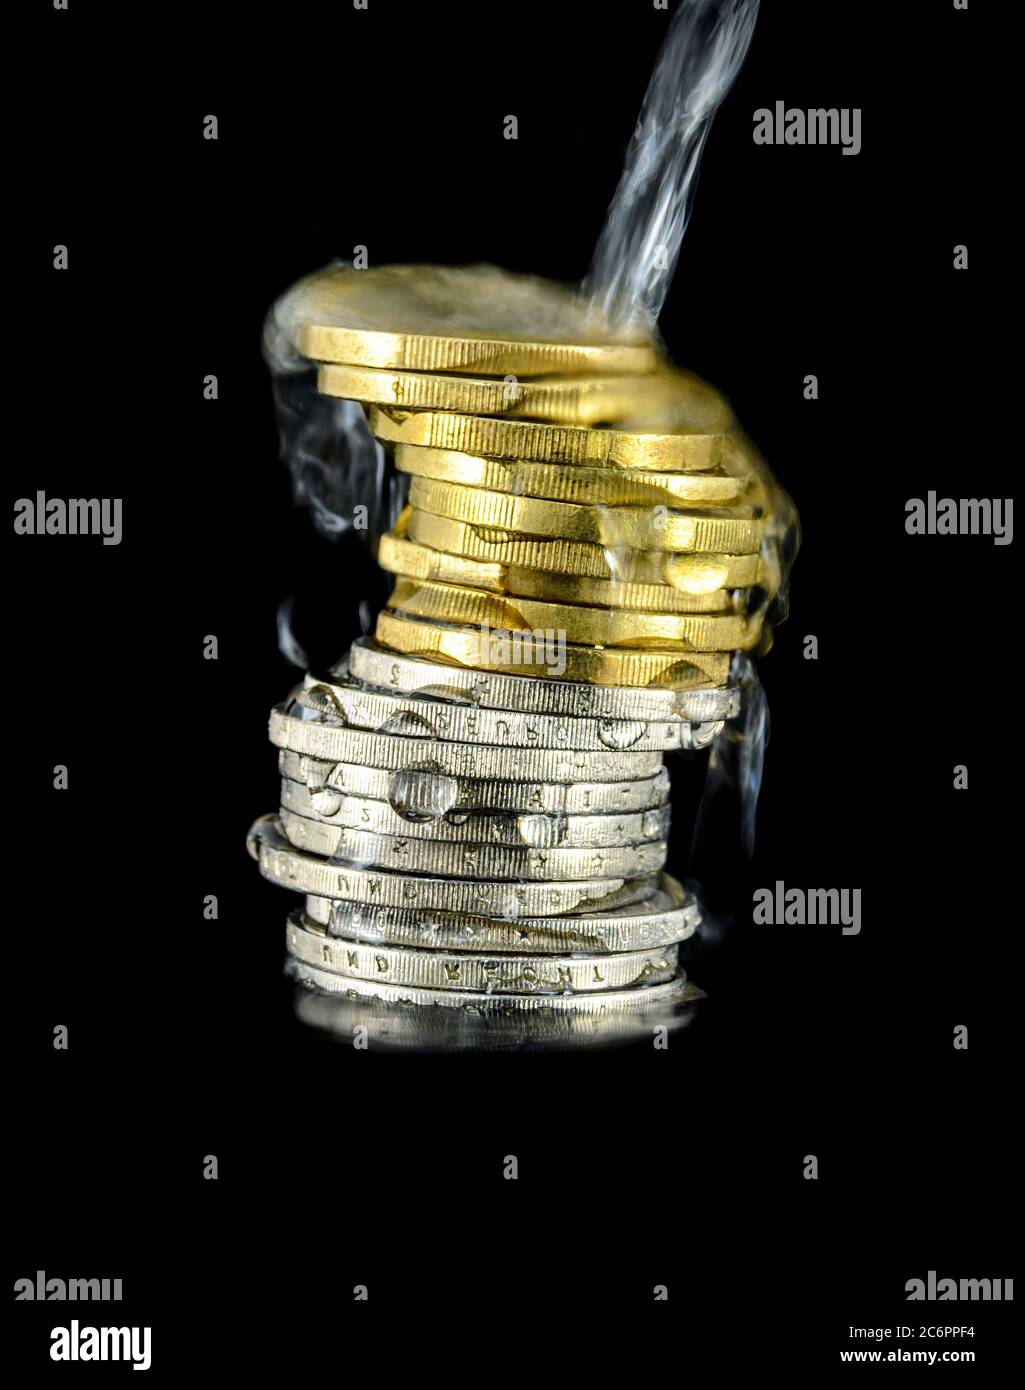 water running over a stack of Euro coins before black background Stock Photo